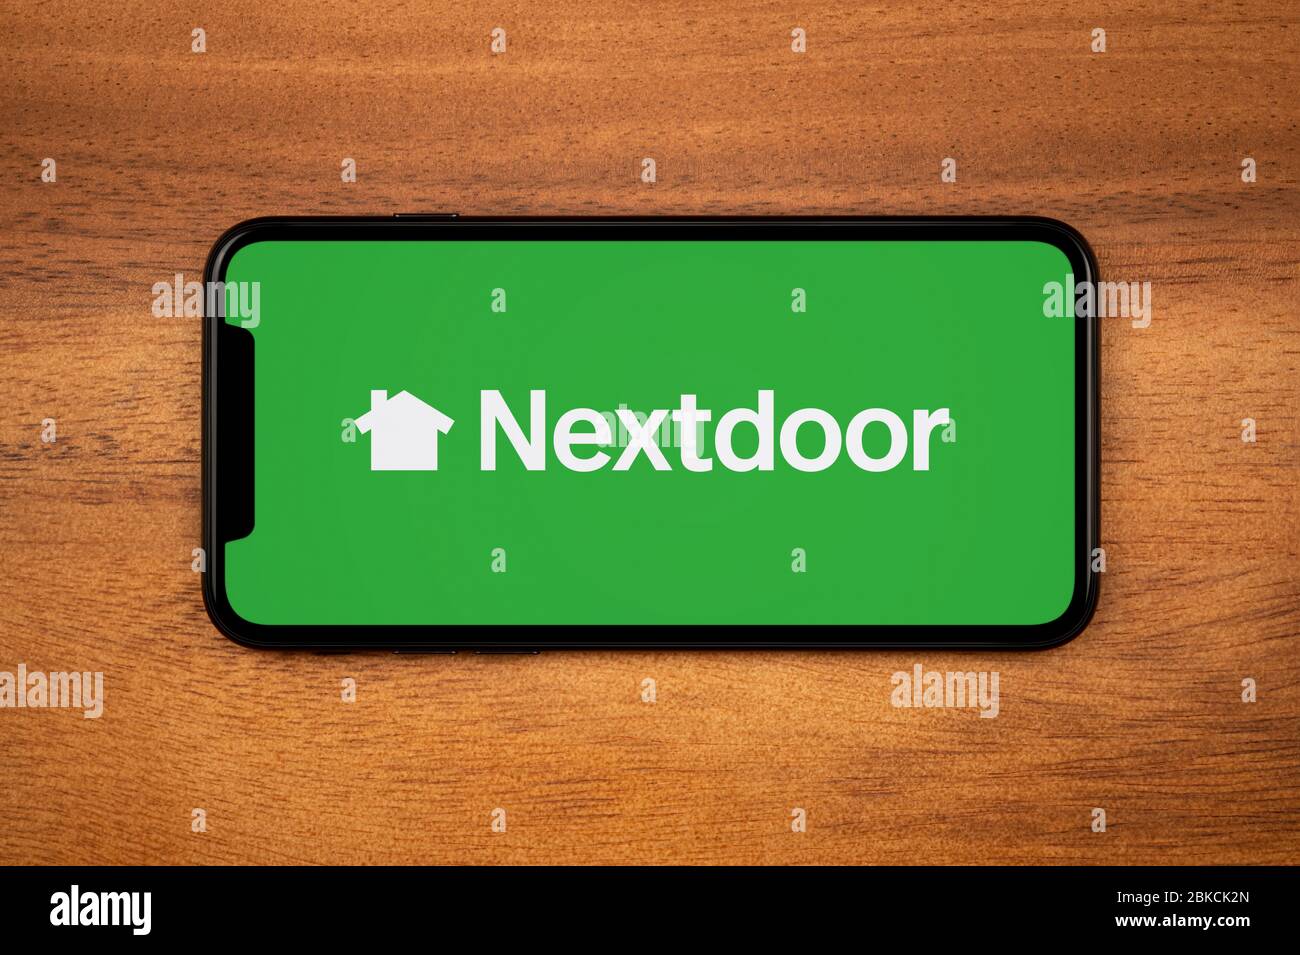 A smartphone showing the Nextdoor logo rests on a plain wooden table (Editorial use only). Stock Photo